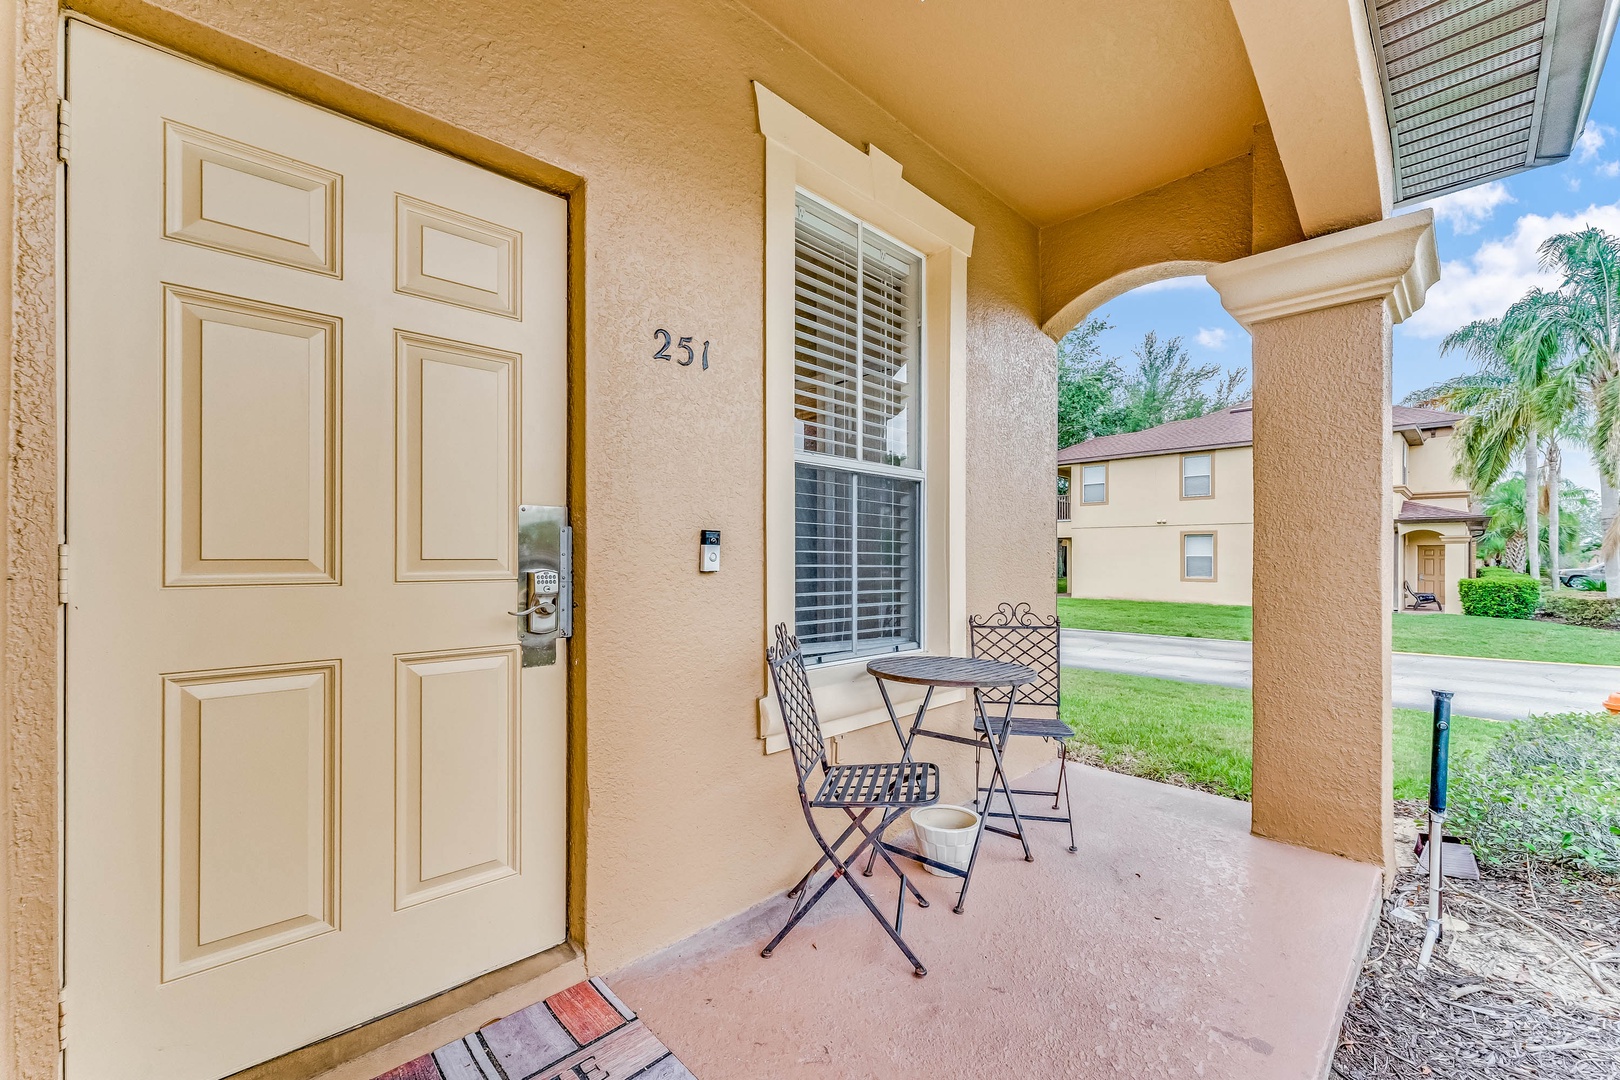 This charming townhouse is equipped with keyless entry for your convenience